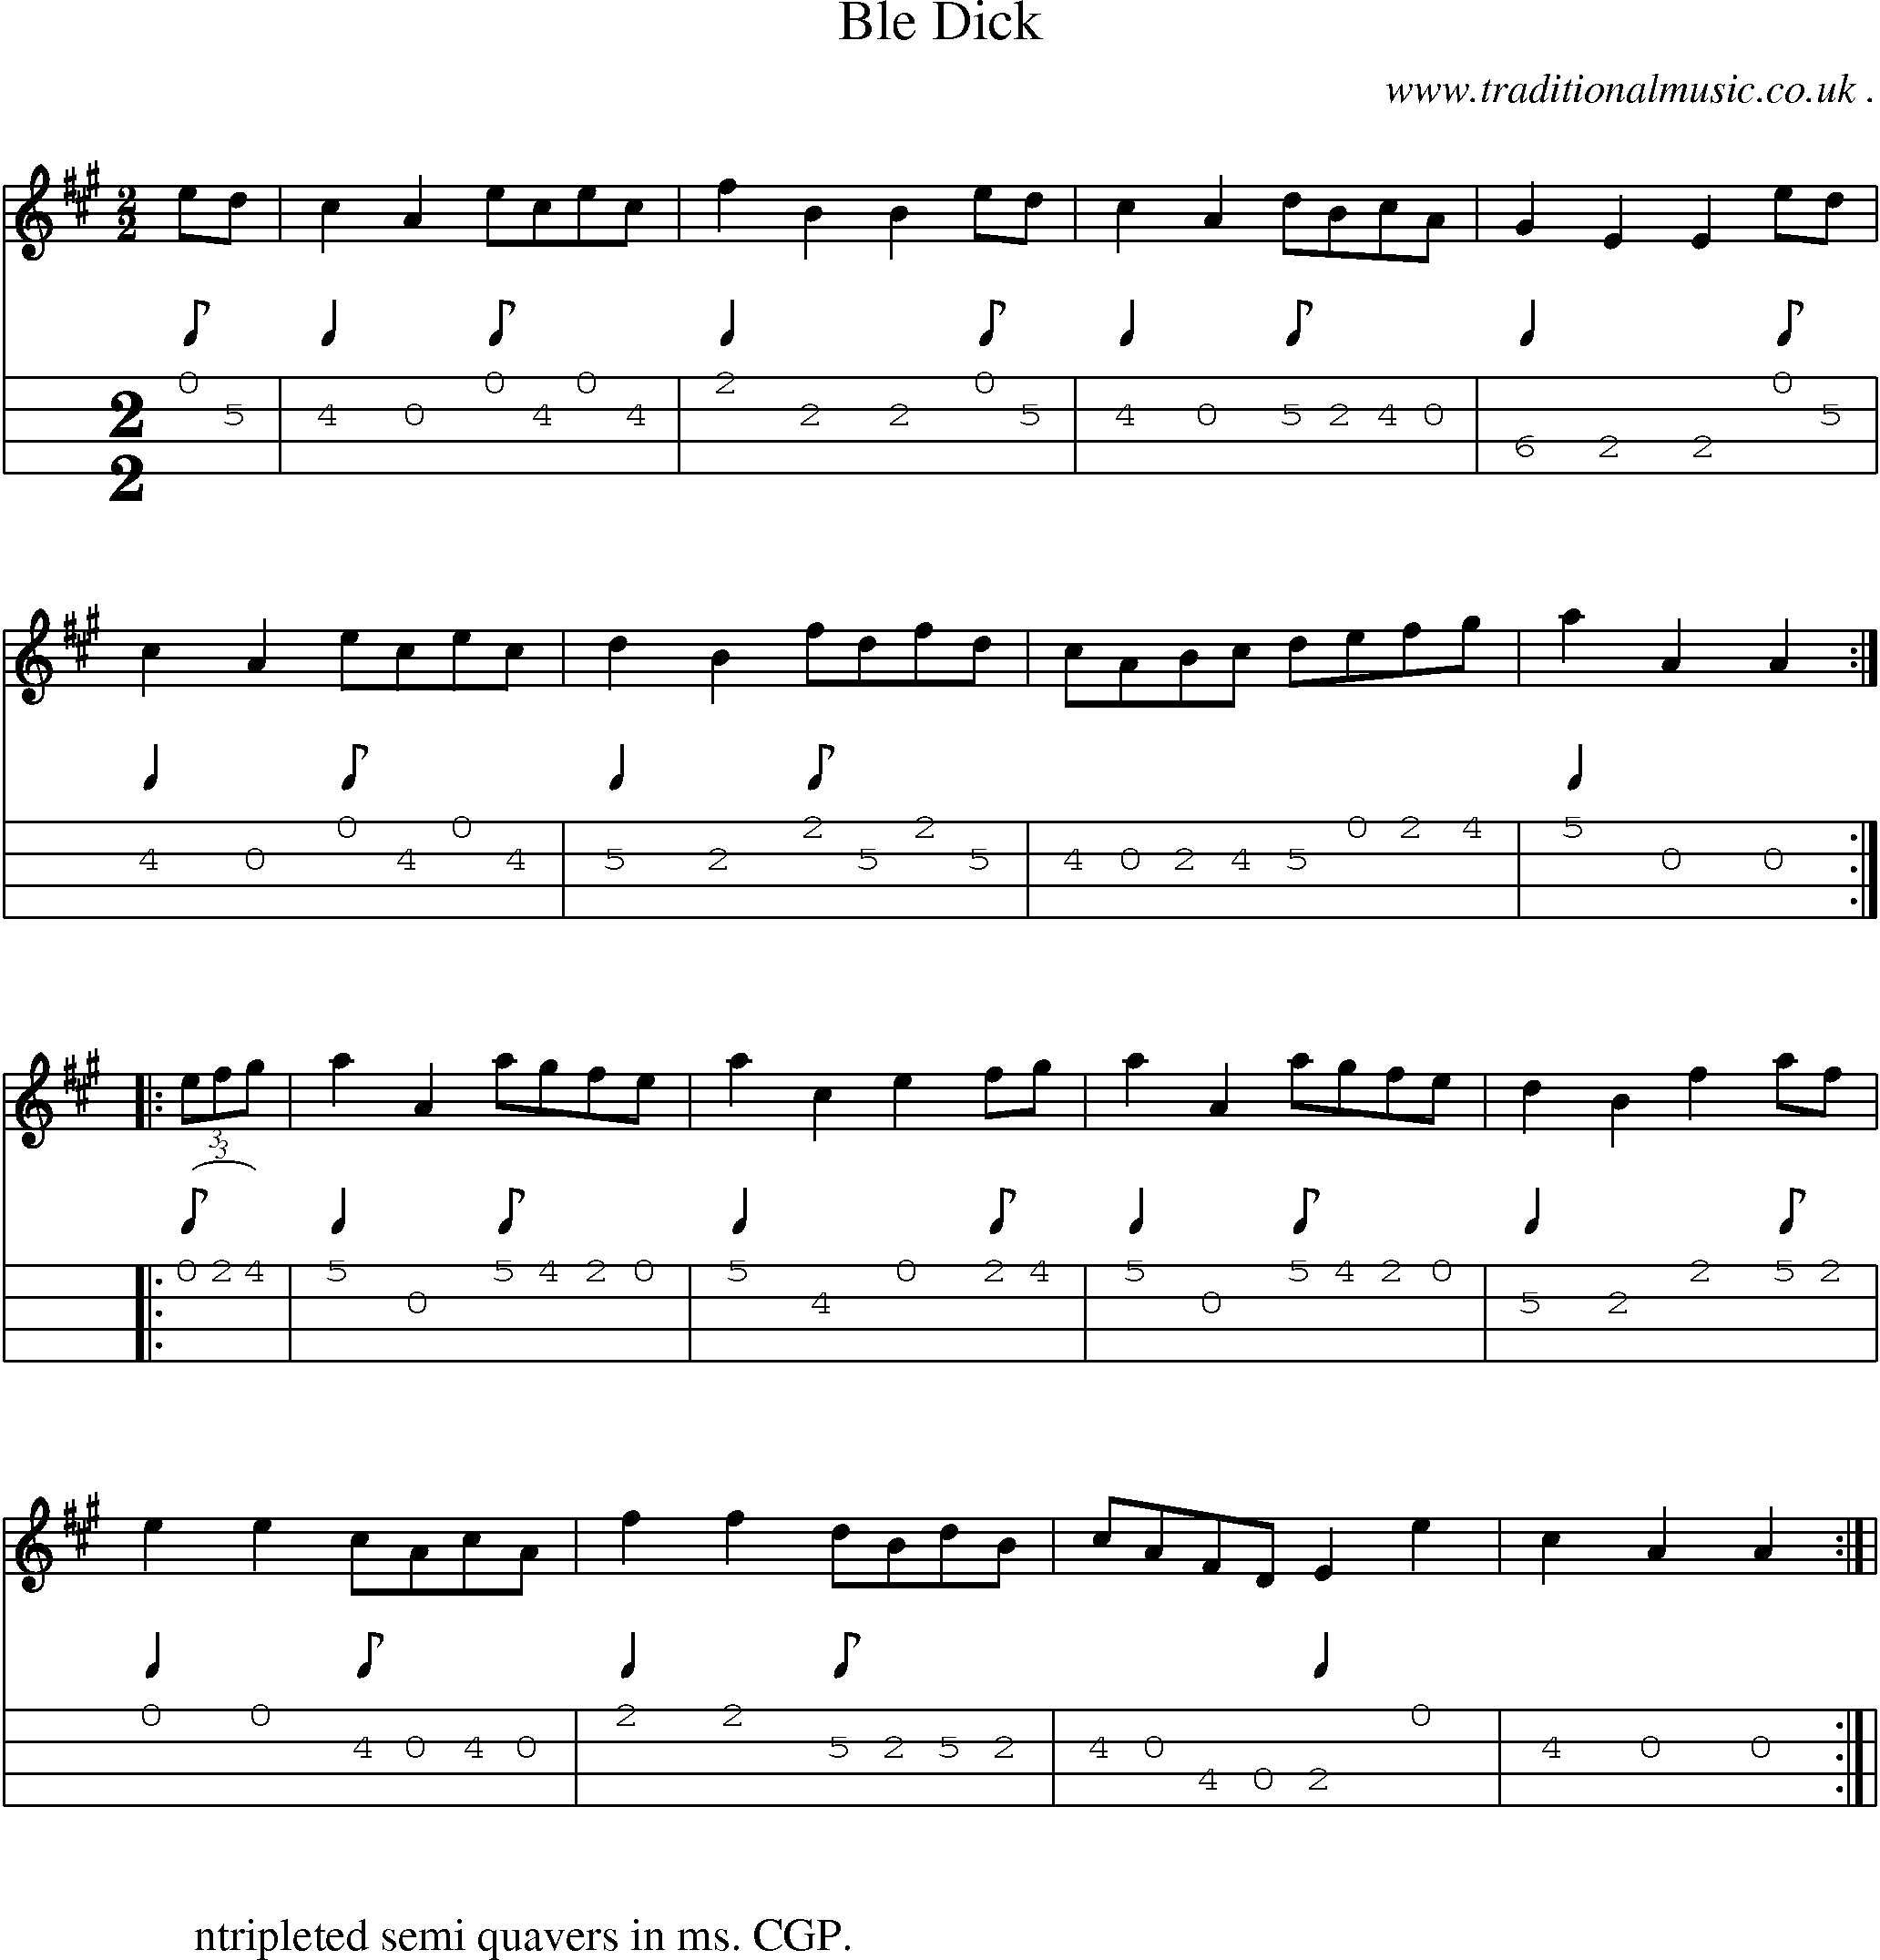 Sheet-Music and Mandolin Tabs for Ble Dick